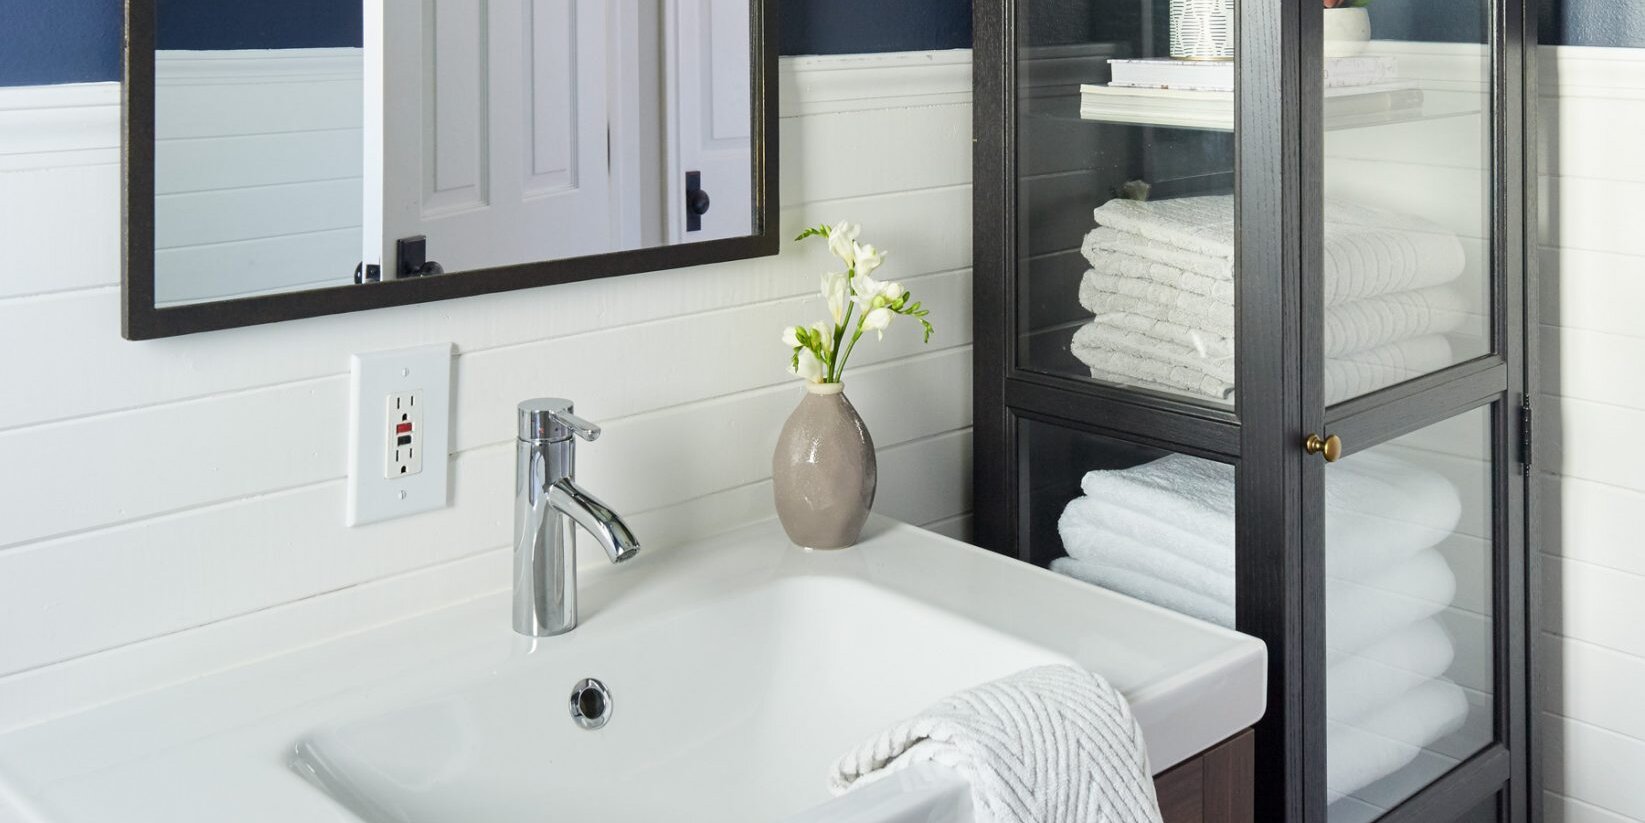 14 Small-Space Hacks to Make the Most of Your Tiny Bathroom